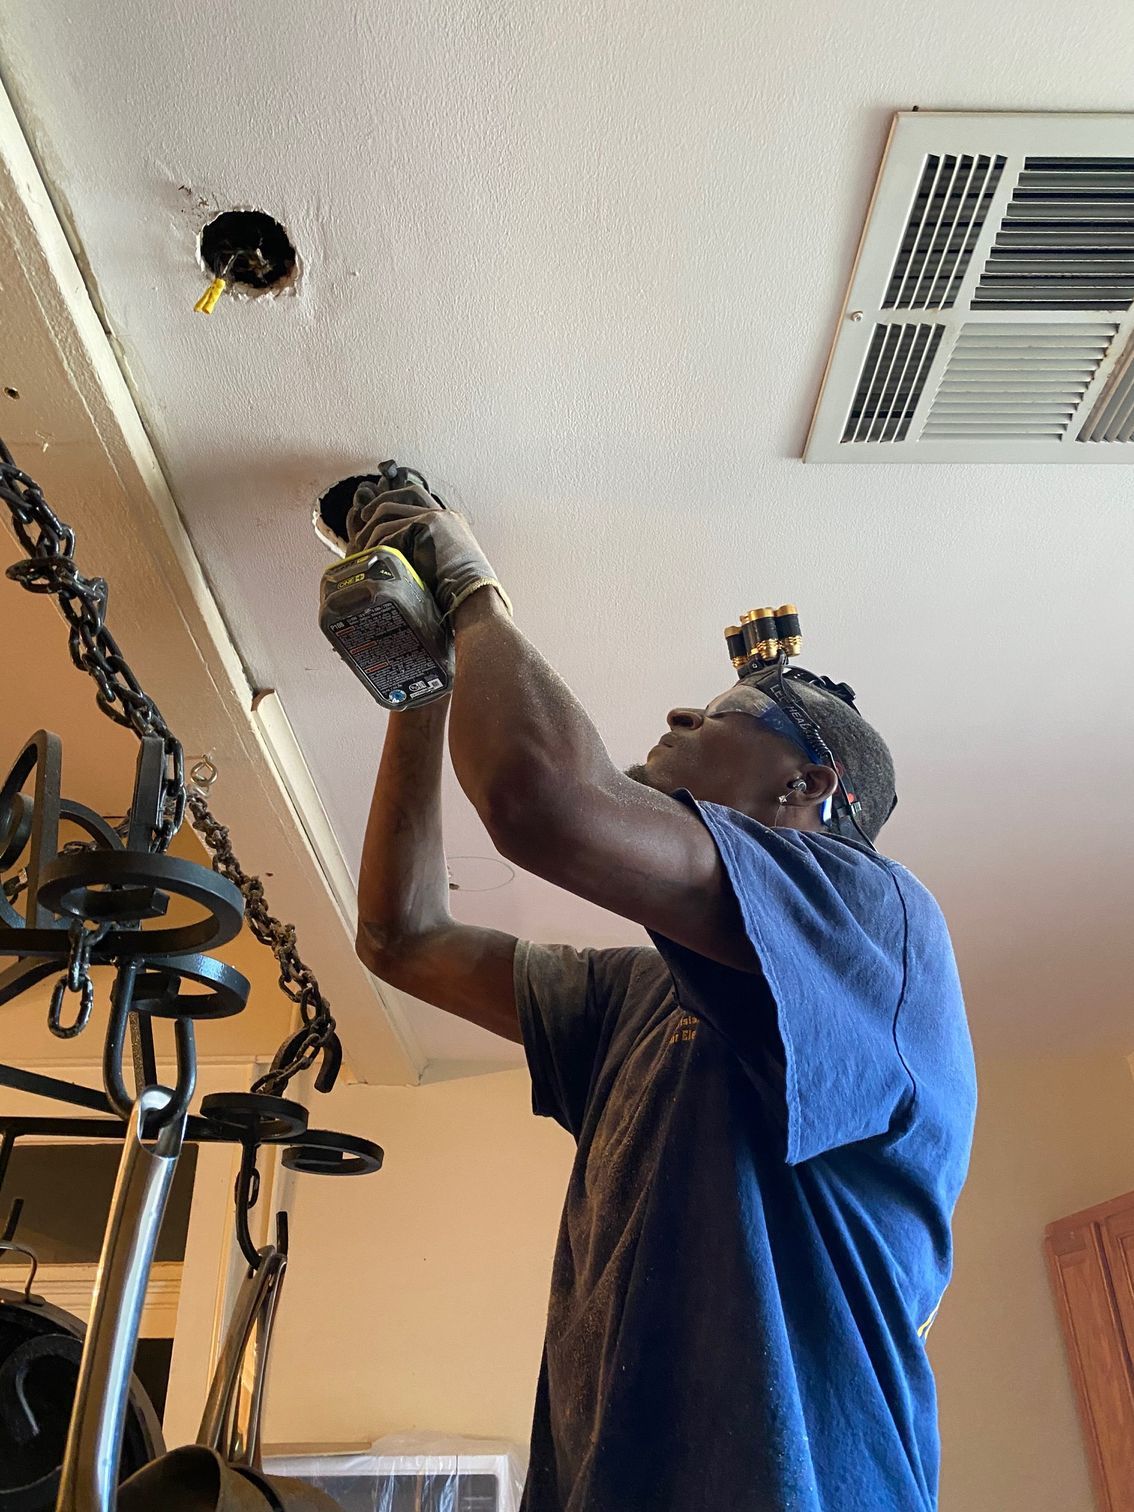 A Man Is Working on A Ceiling with A Drill.